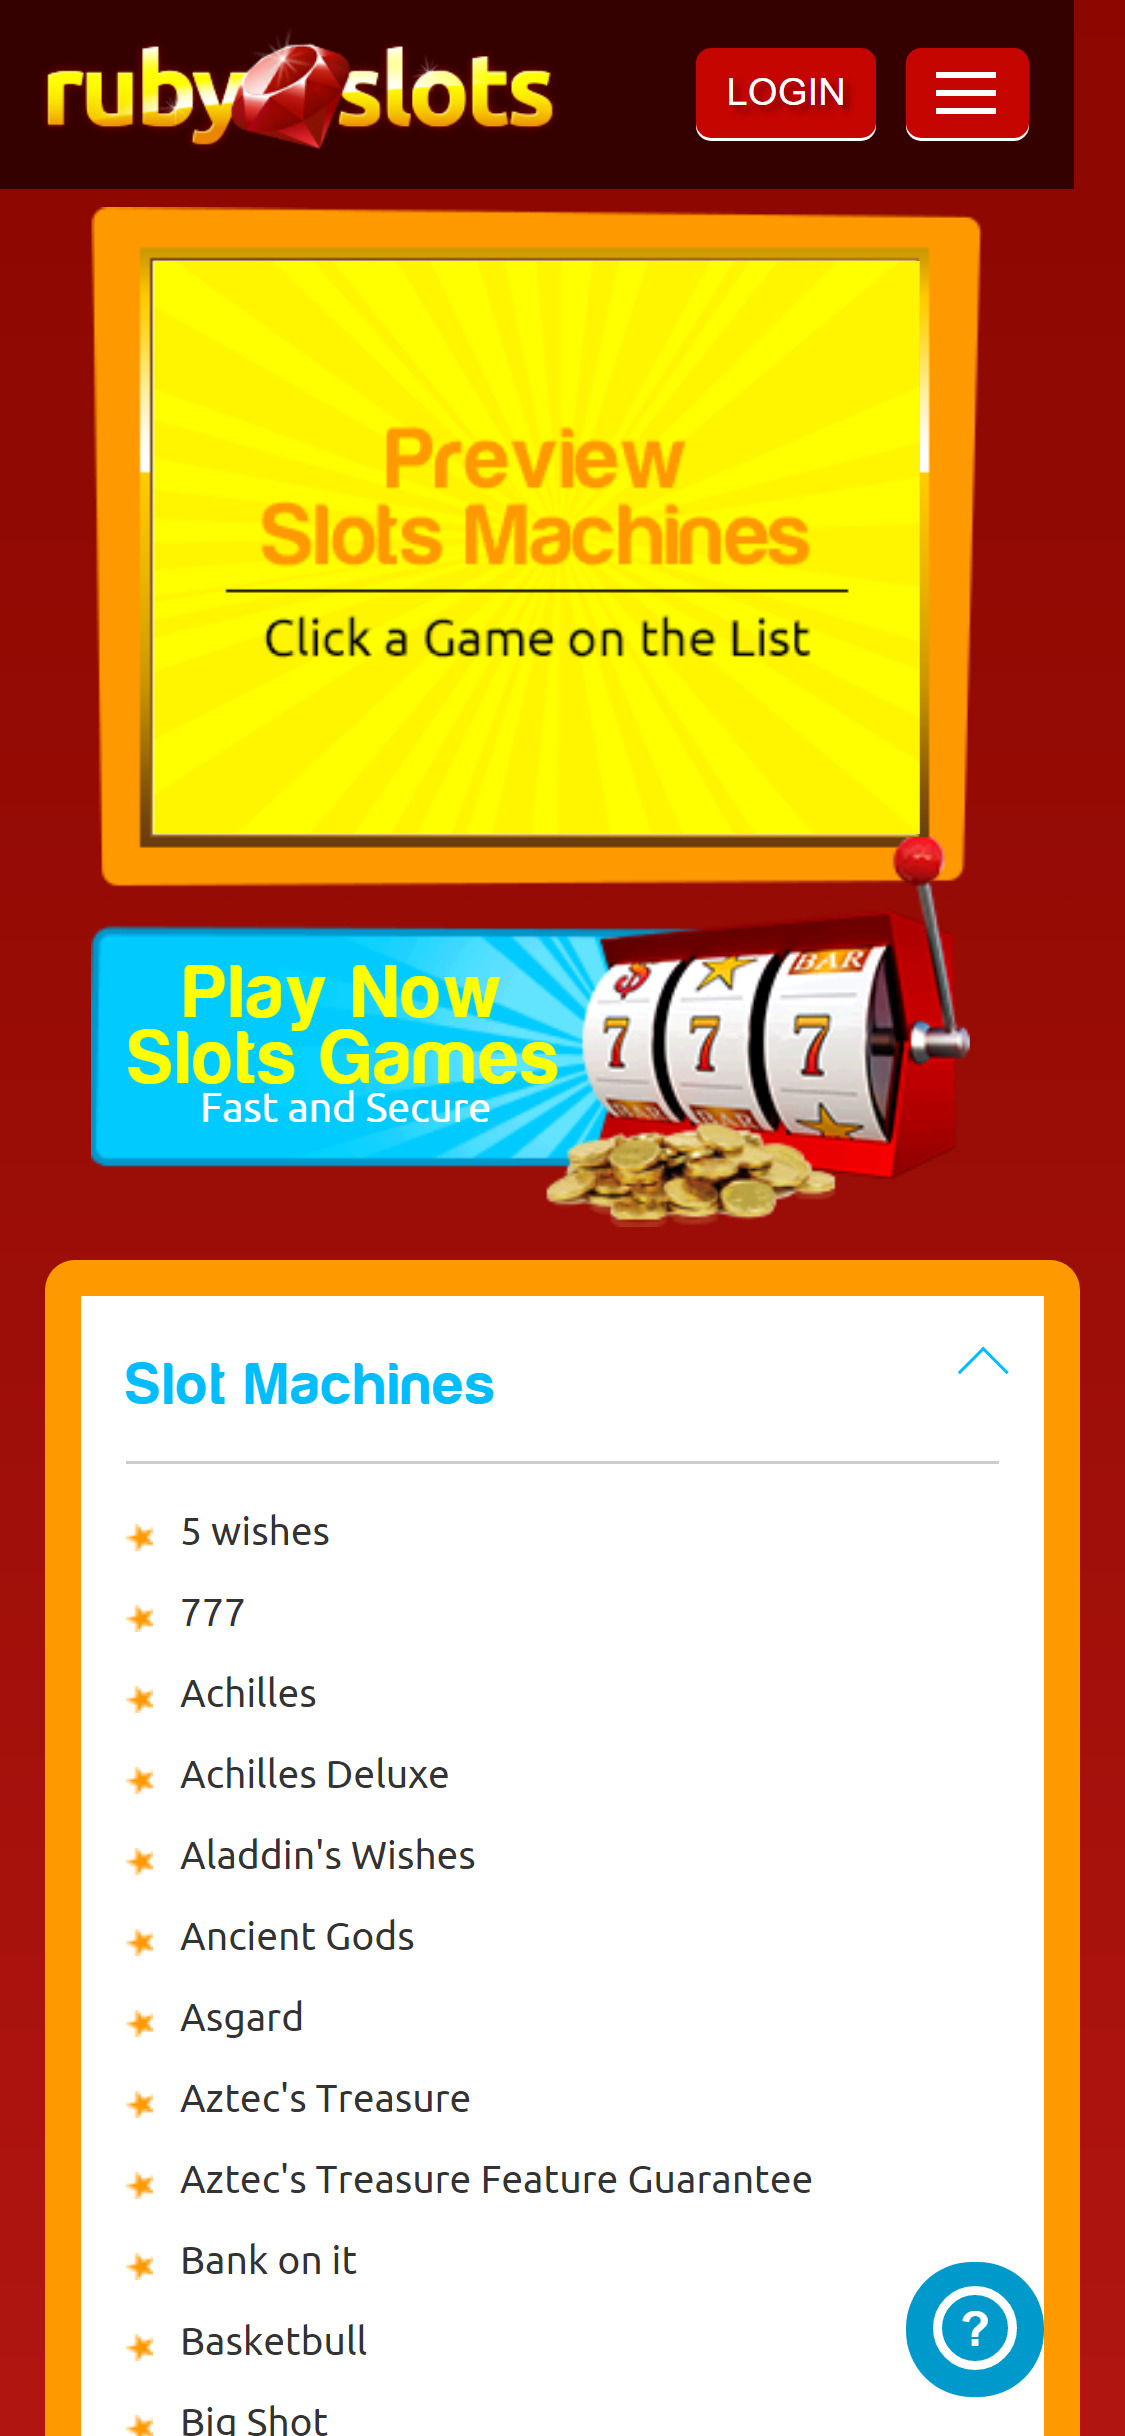 Ruby Slots Casino Mobile Games Review